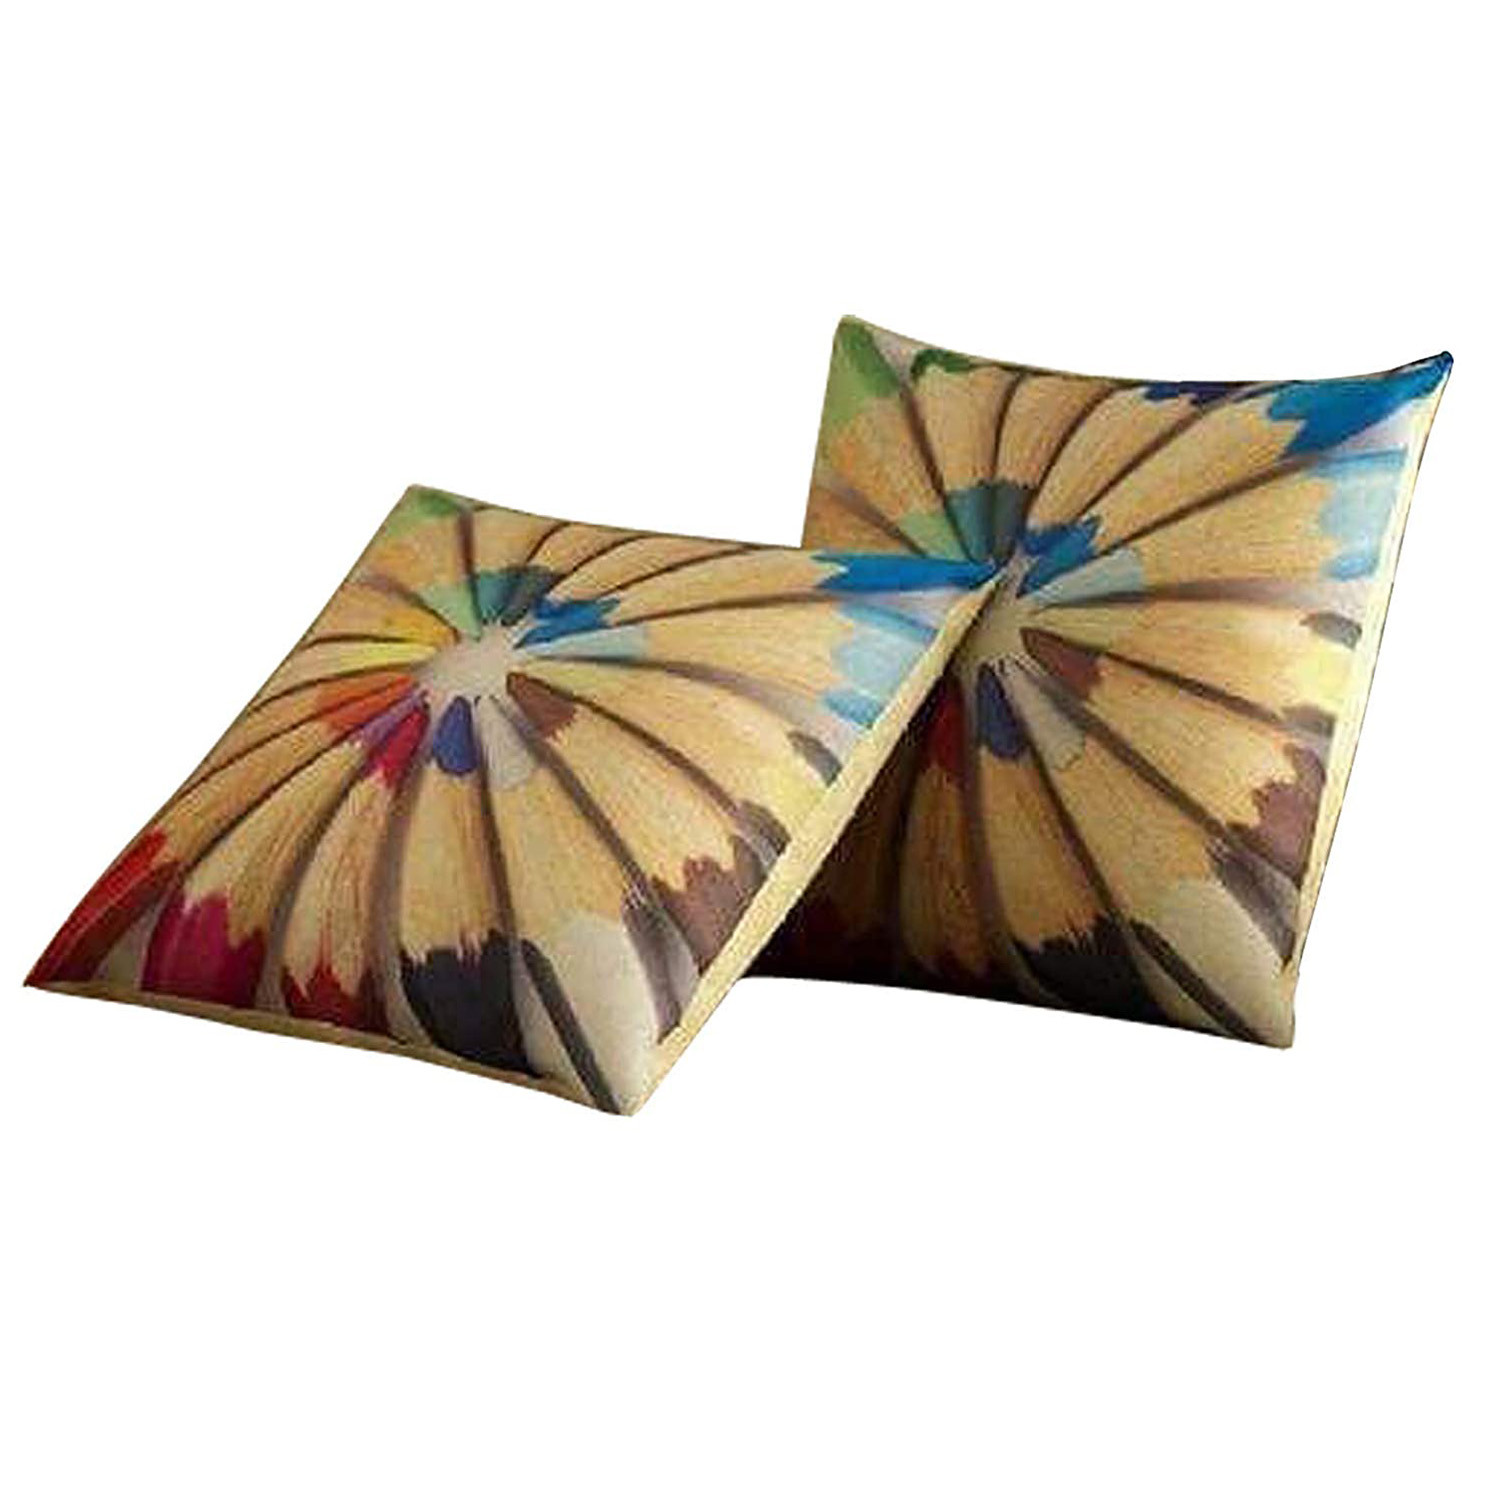 Kuber Industries Cushion Cover|Ractangle Cushion Covers|Sofa Cushion Covers|Cushion Covers 16 inch x 16 inch|Cushion Cover Set of 5 (Multi)